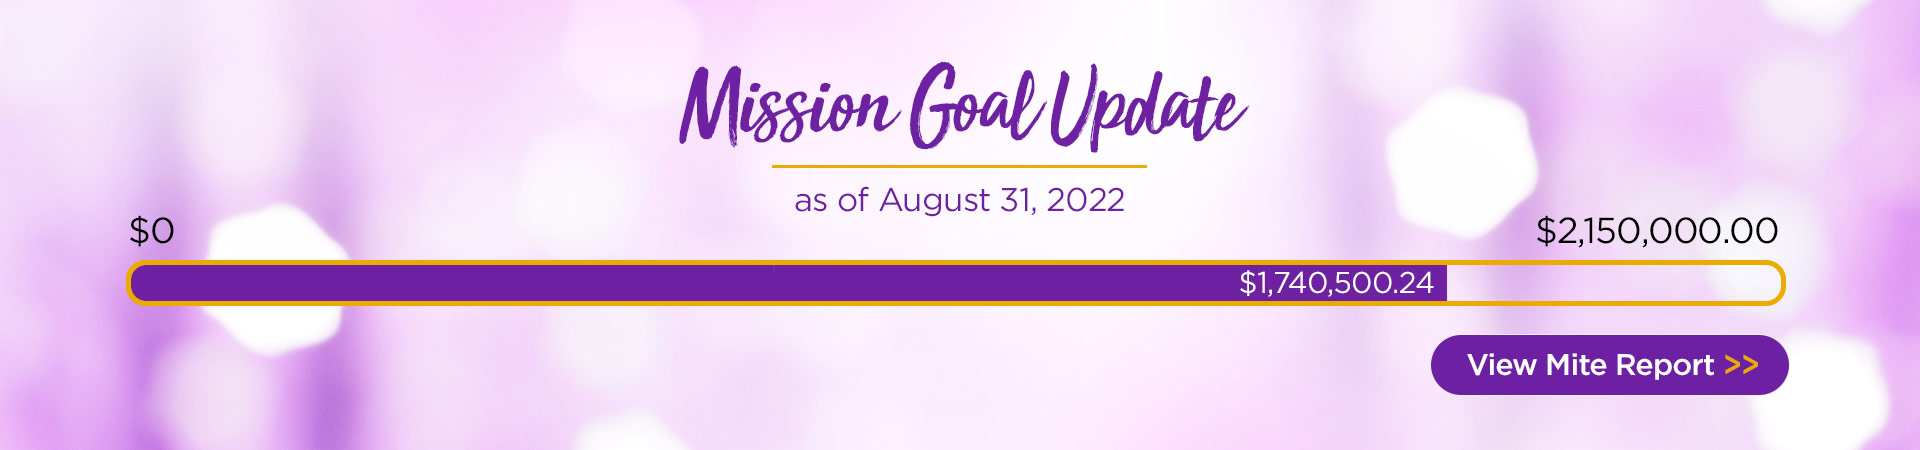 Mission Goal Update as of August 31, 2022. View Mite Report.